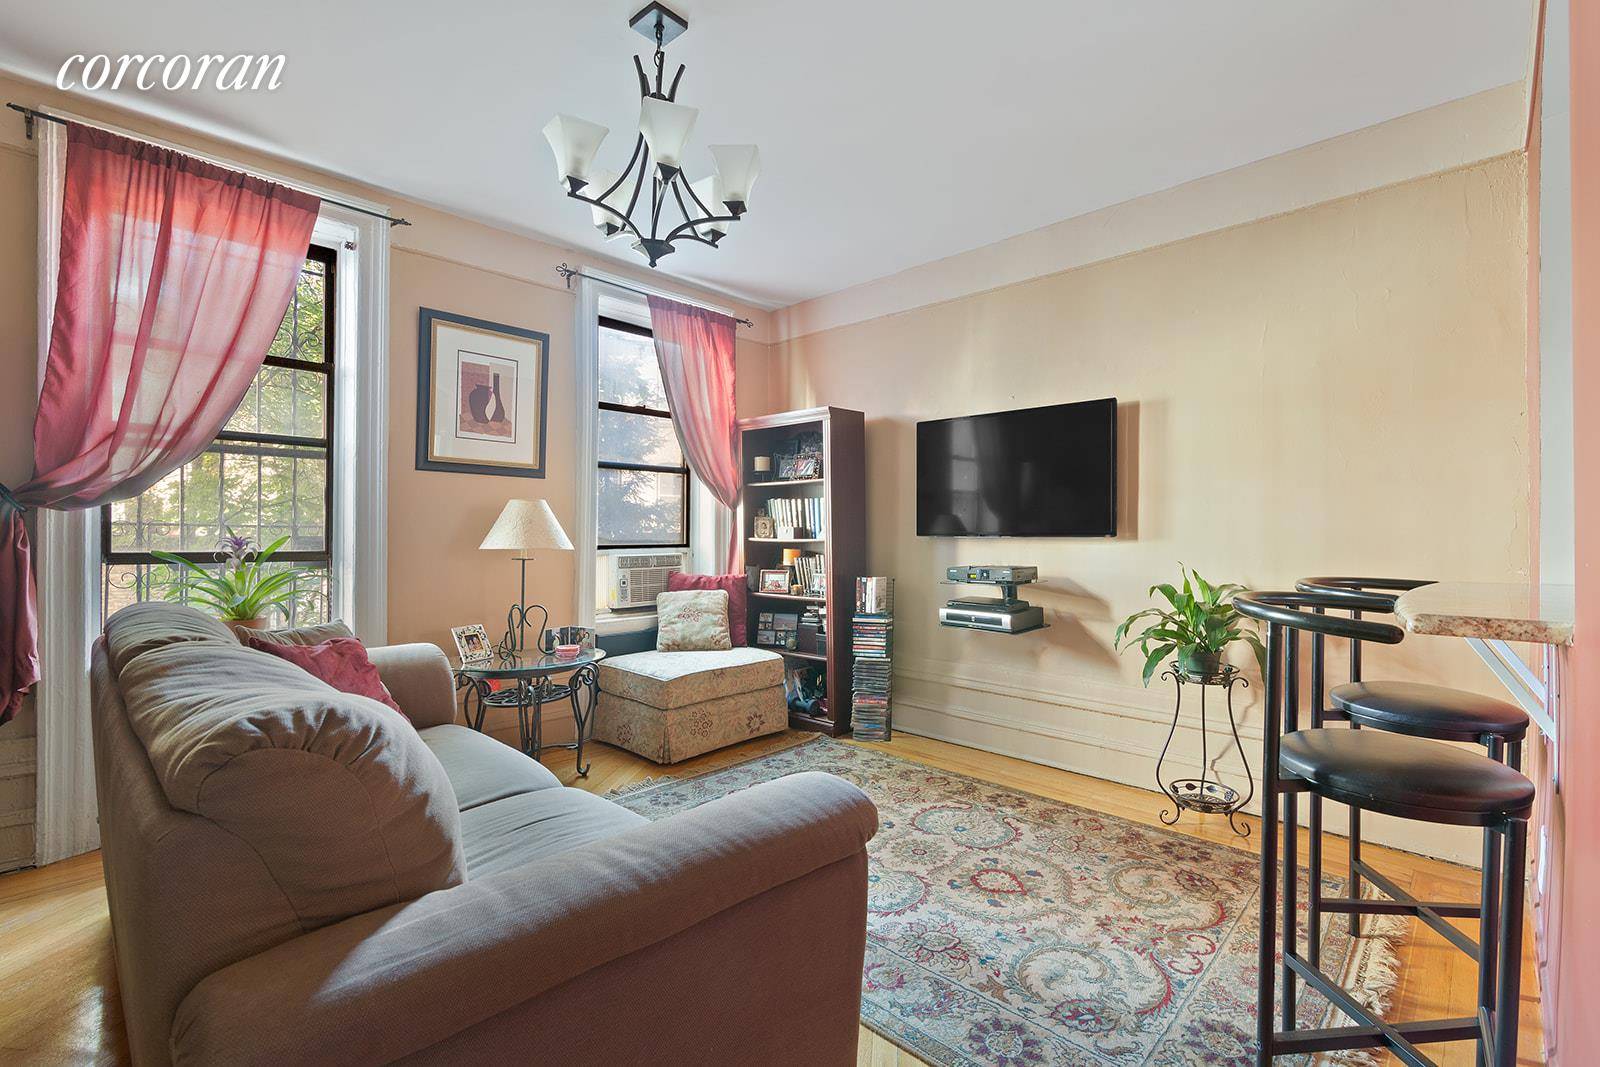 One Bedroom Co op near Grand Army Plaza !